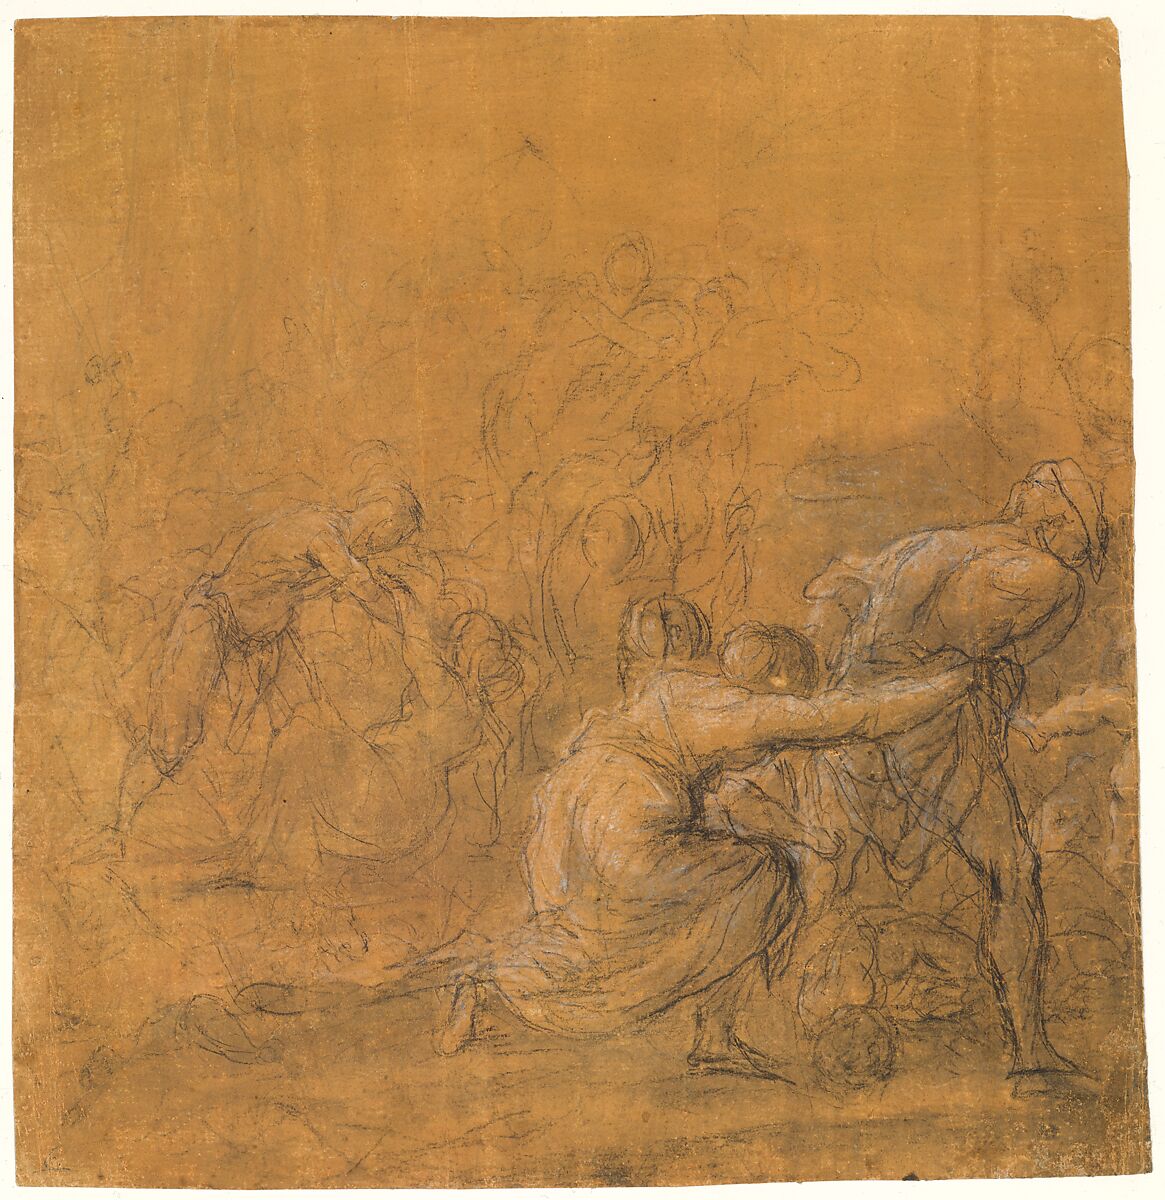 The Massacre of the Innocents, The Veneto (1600–1699), Black chalk, heightened with white (partly oxidized), on paper tinted orangish red. 